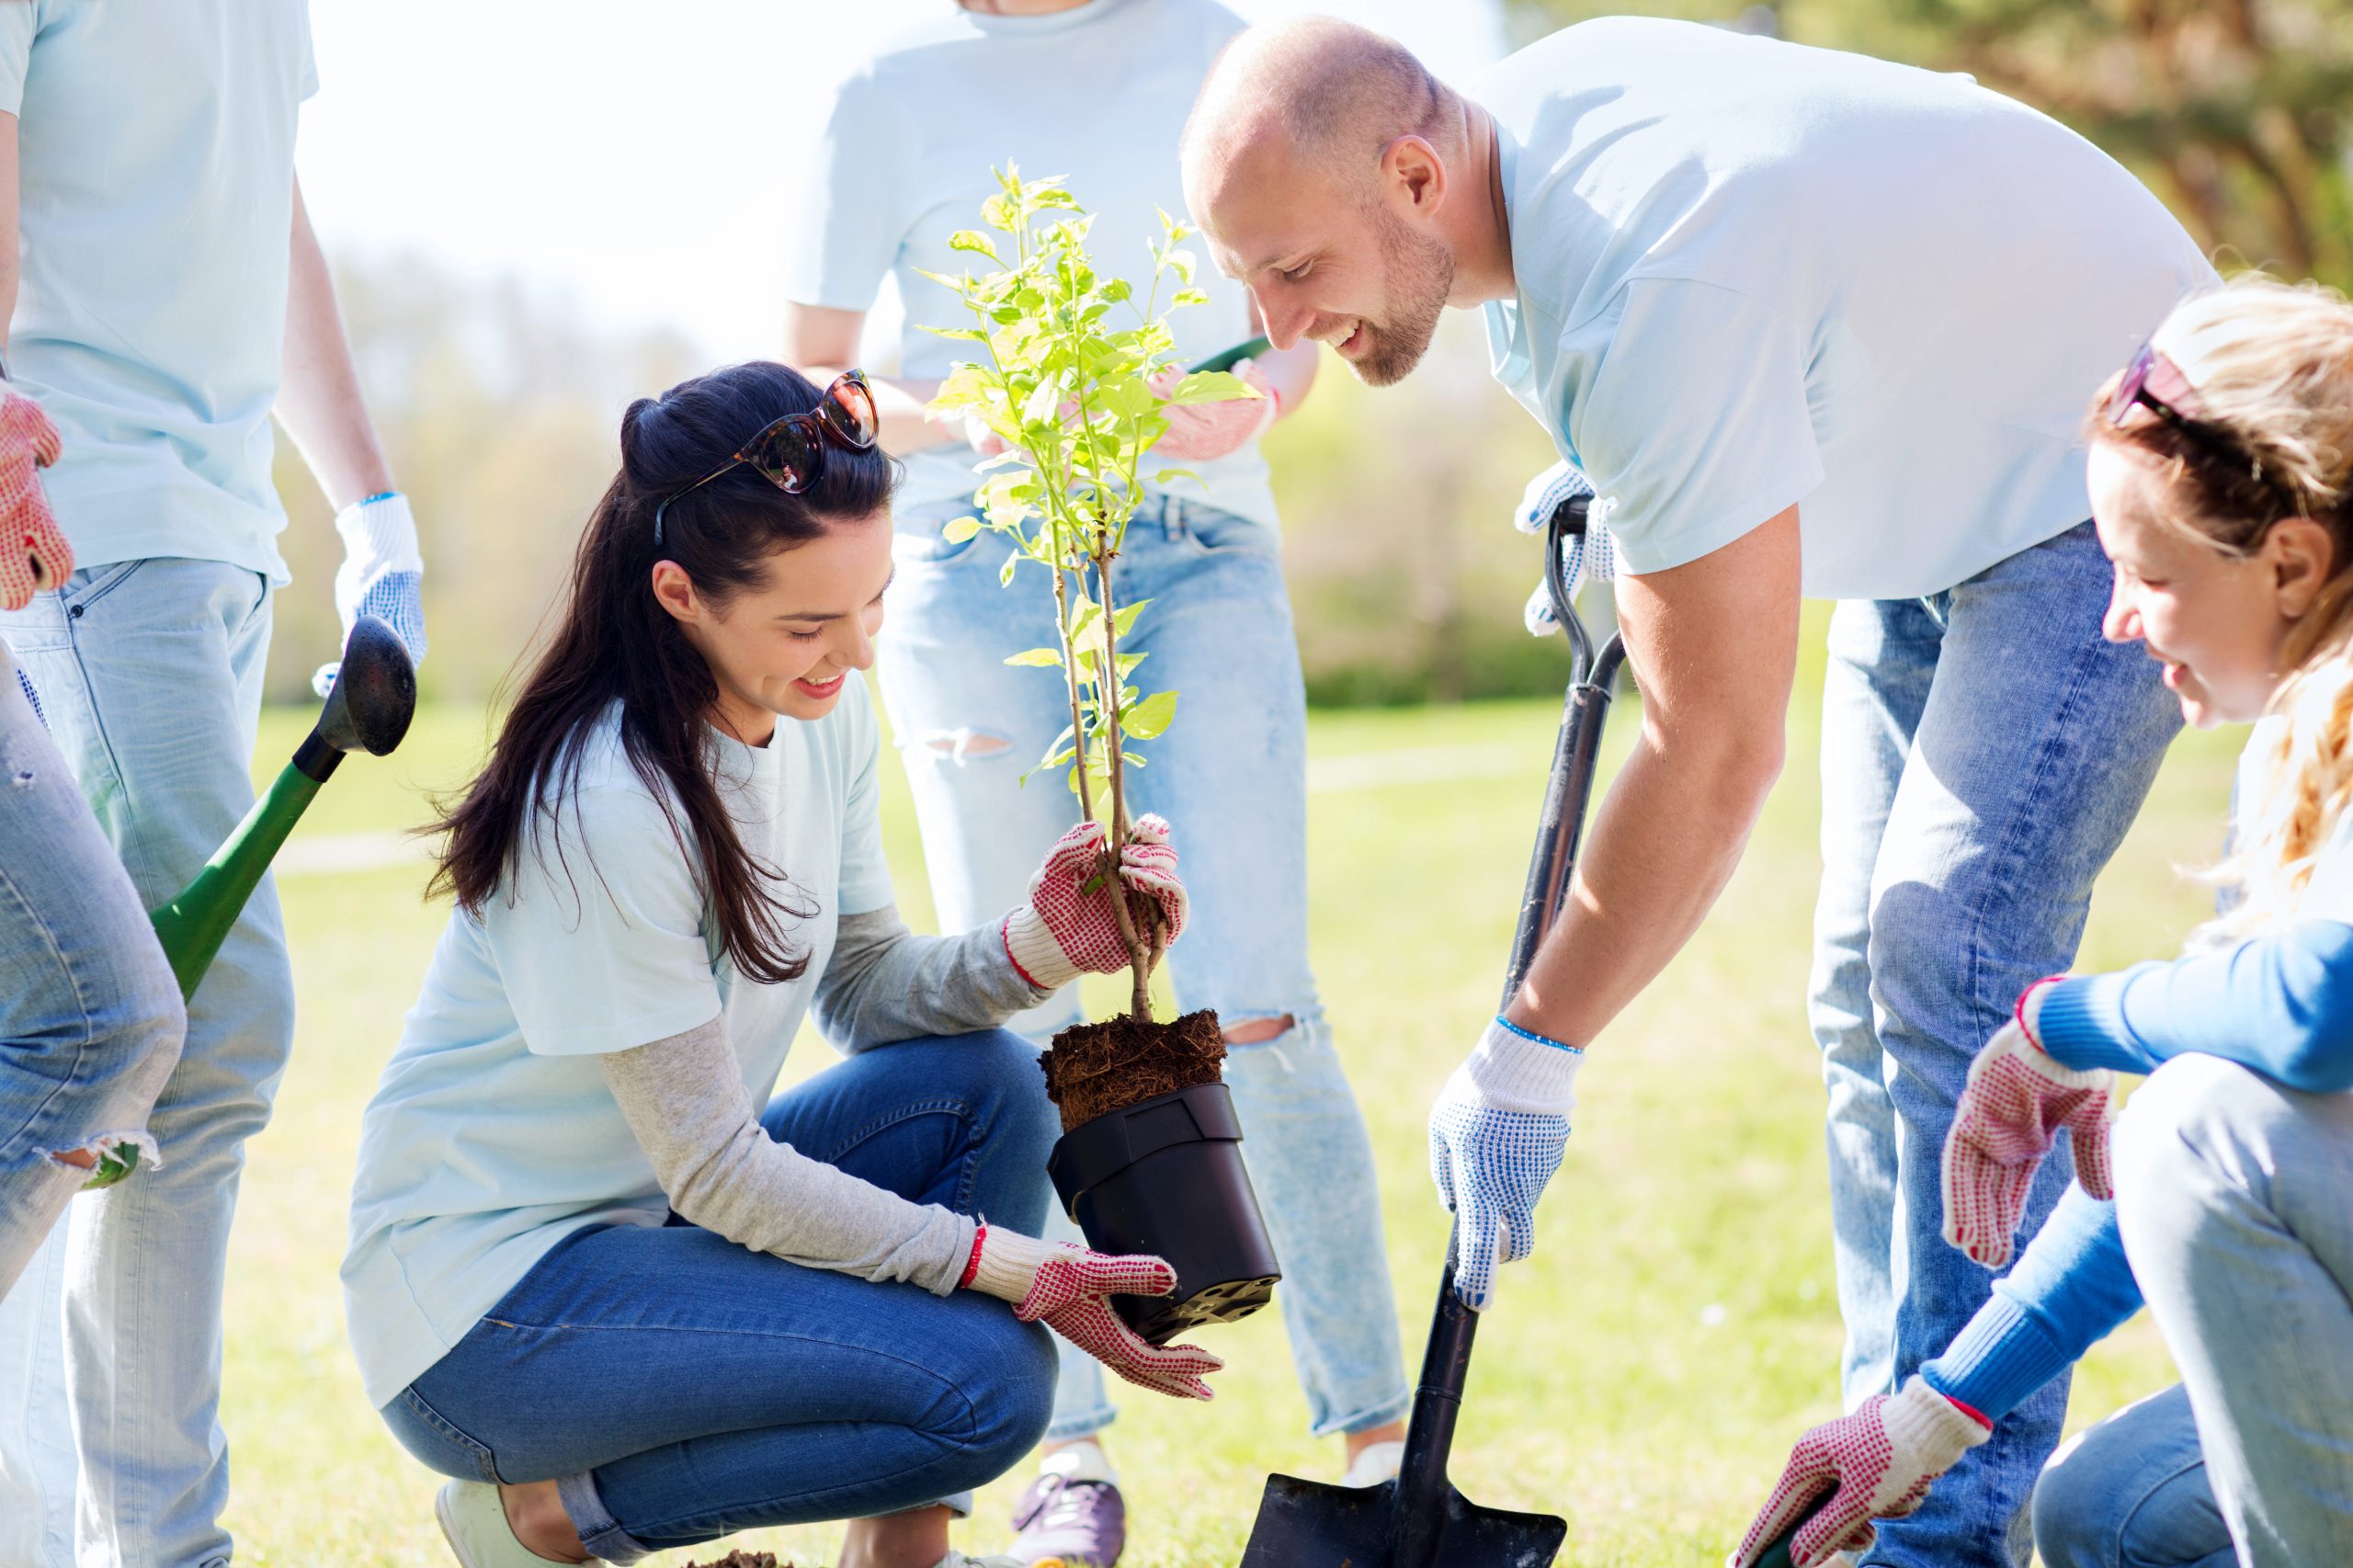 A photo of some volunteers planting a tree